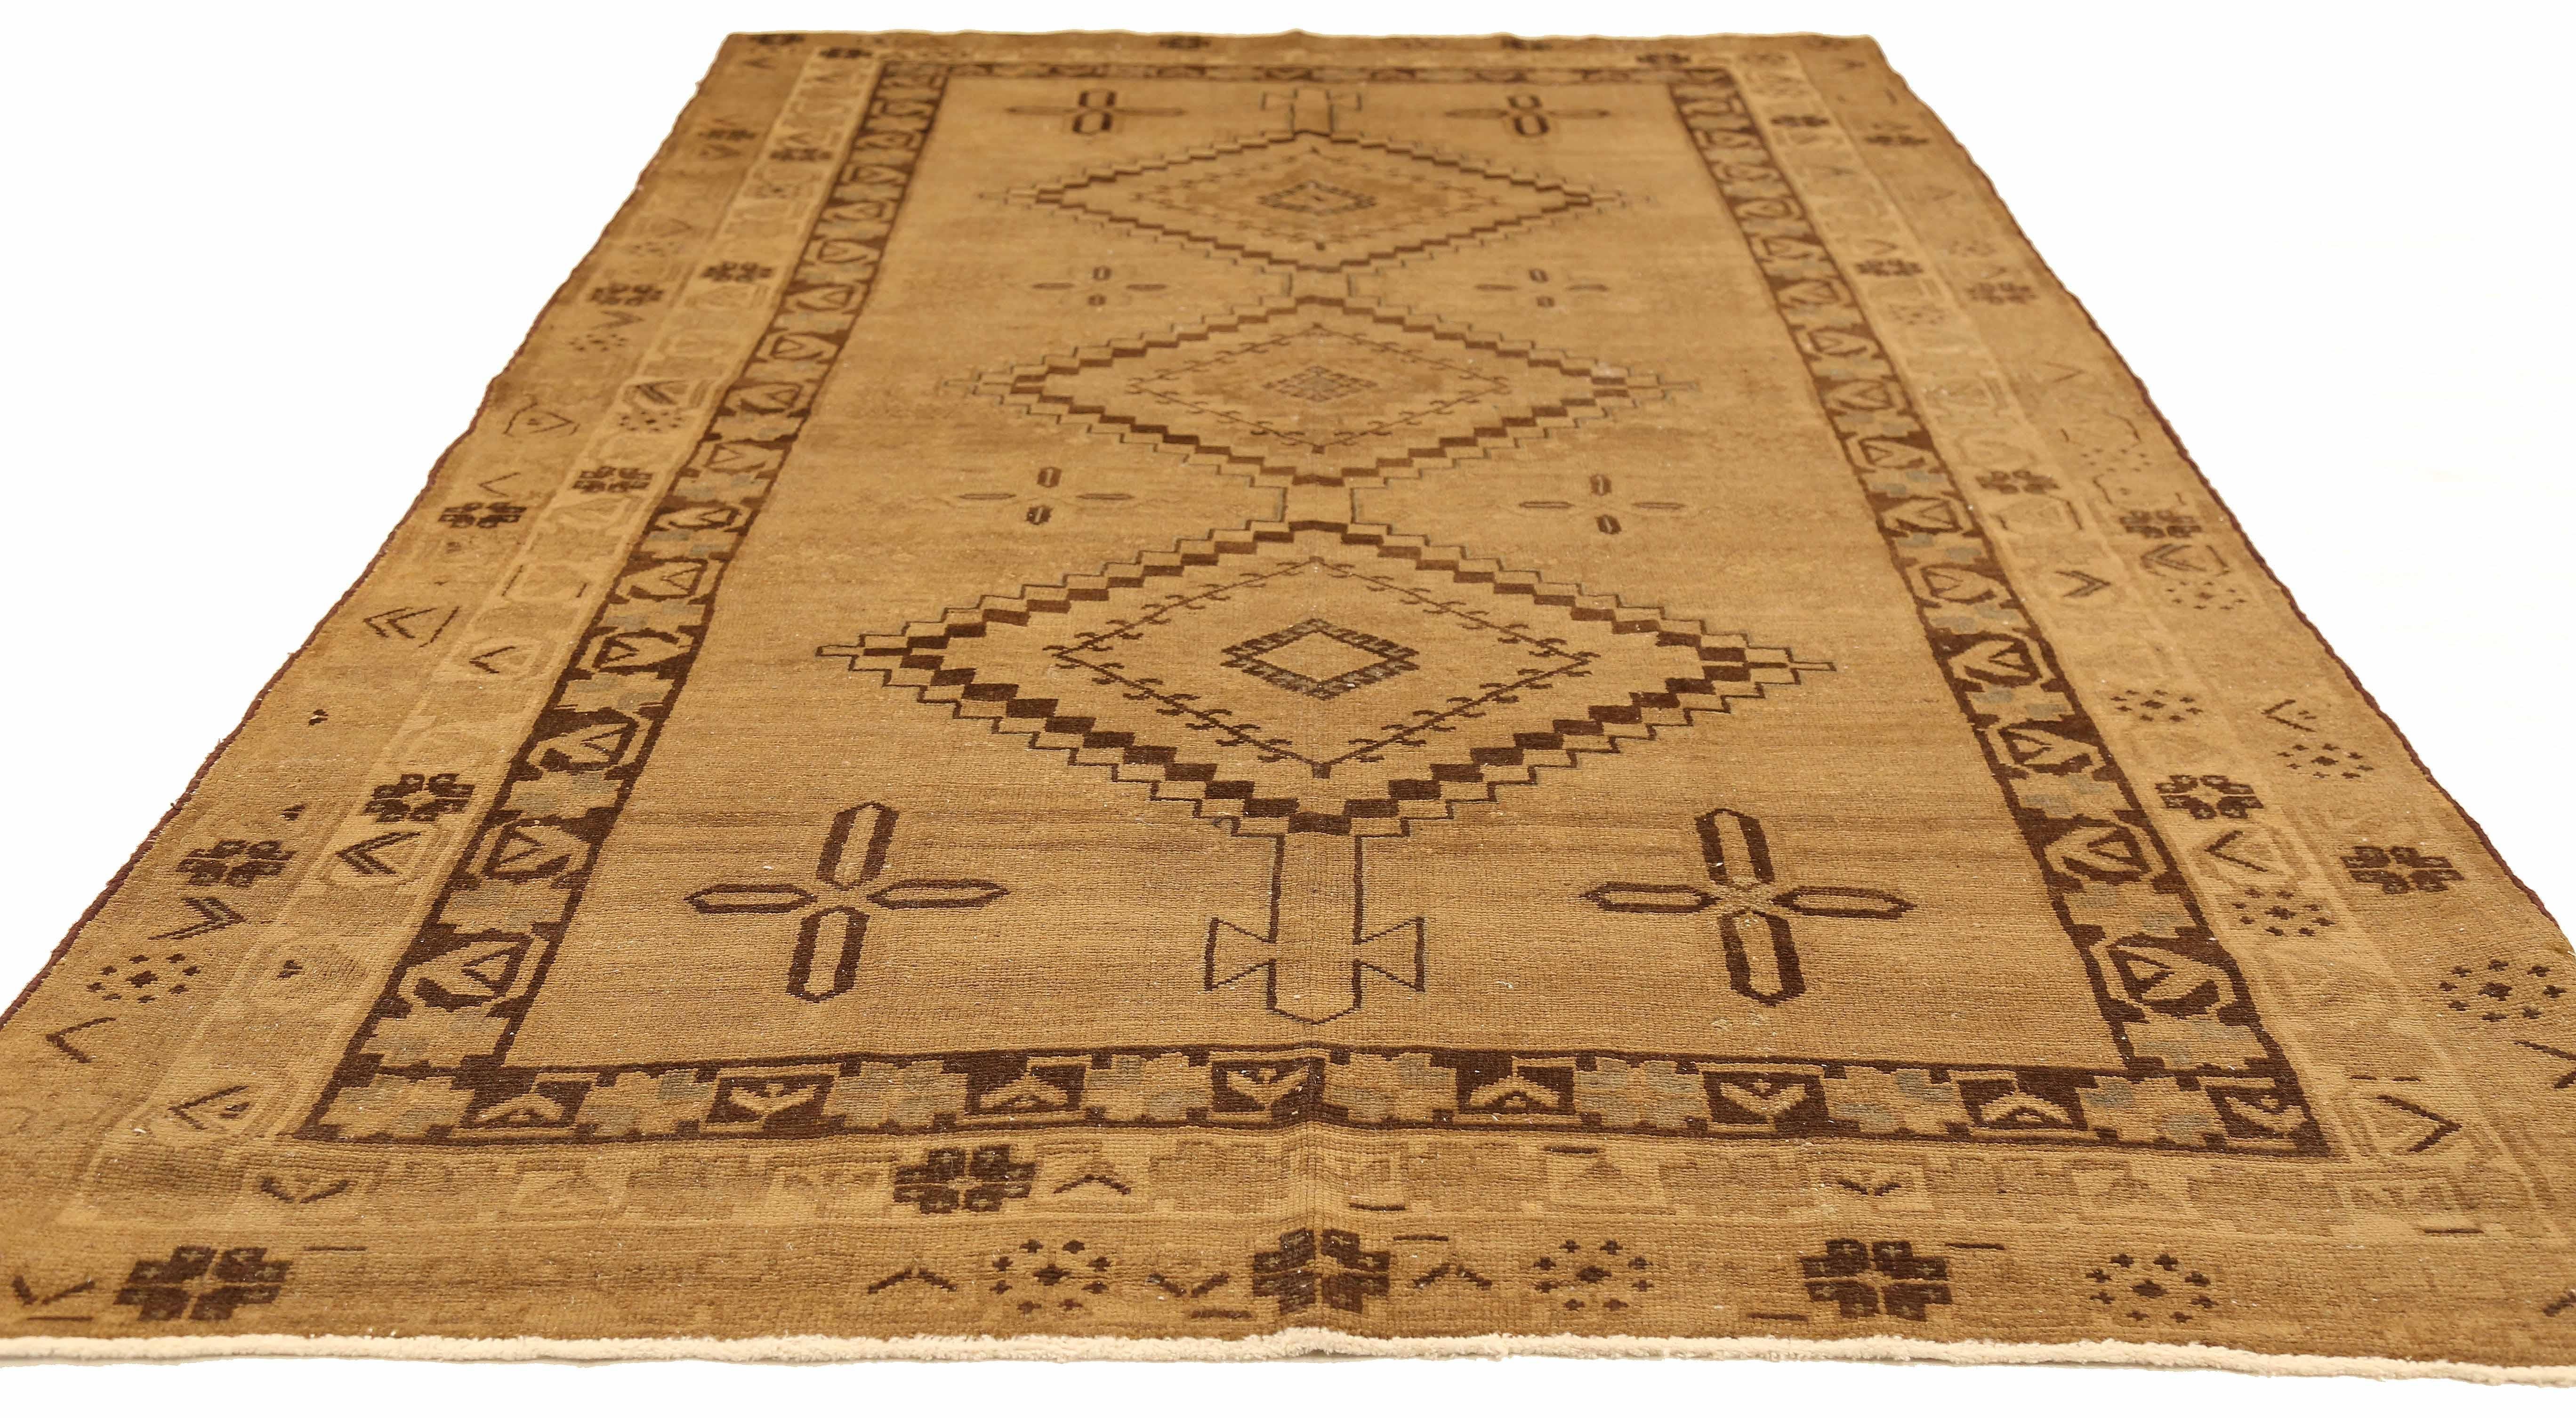 Antique Persian runner rug handwoven from the finest sheep’s wool and colored with all-natural vegetable dyes that are safe for humans and pets. It’s a traditional Malayer design featuring brown geometric details over a beige field. It’s a lovely